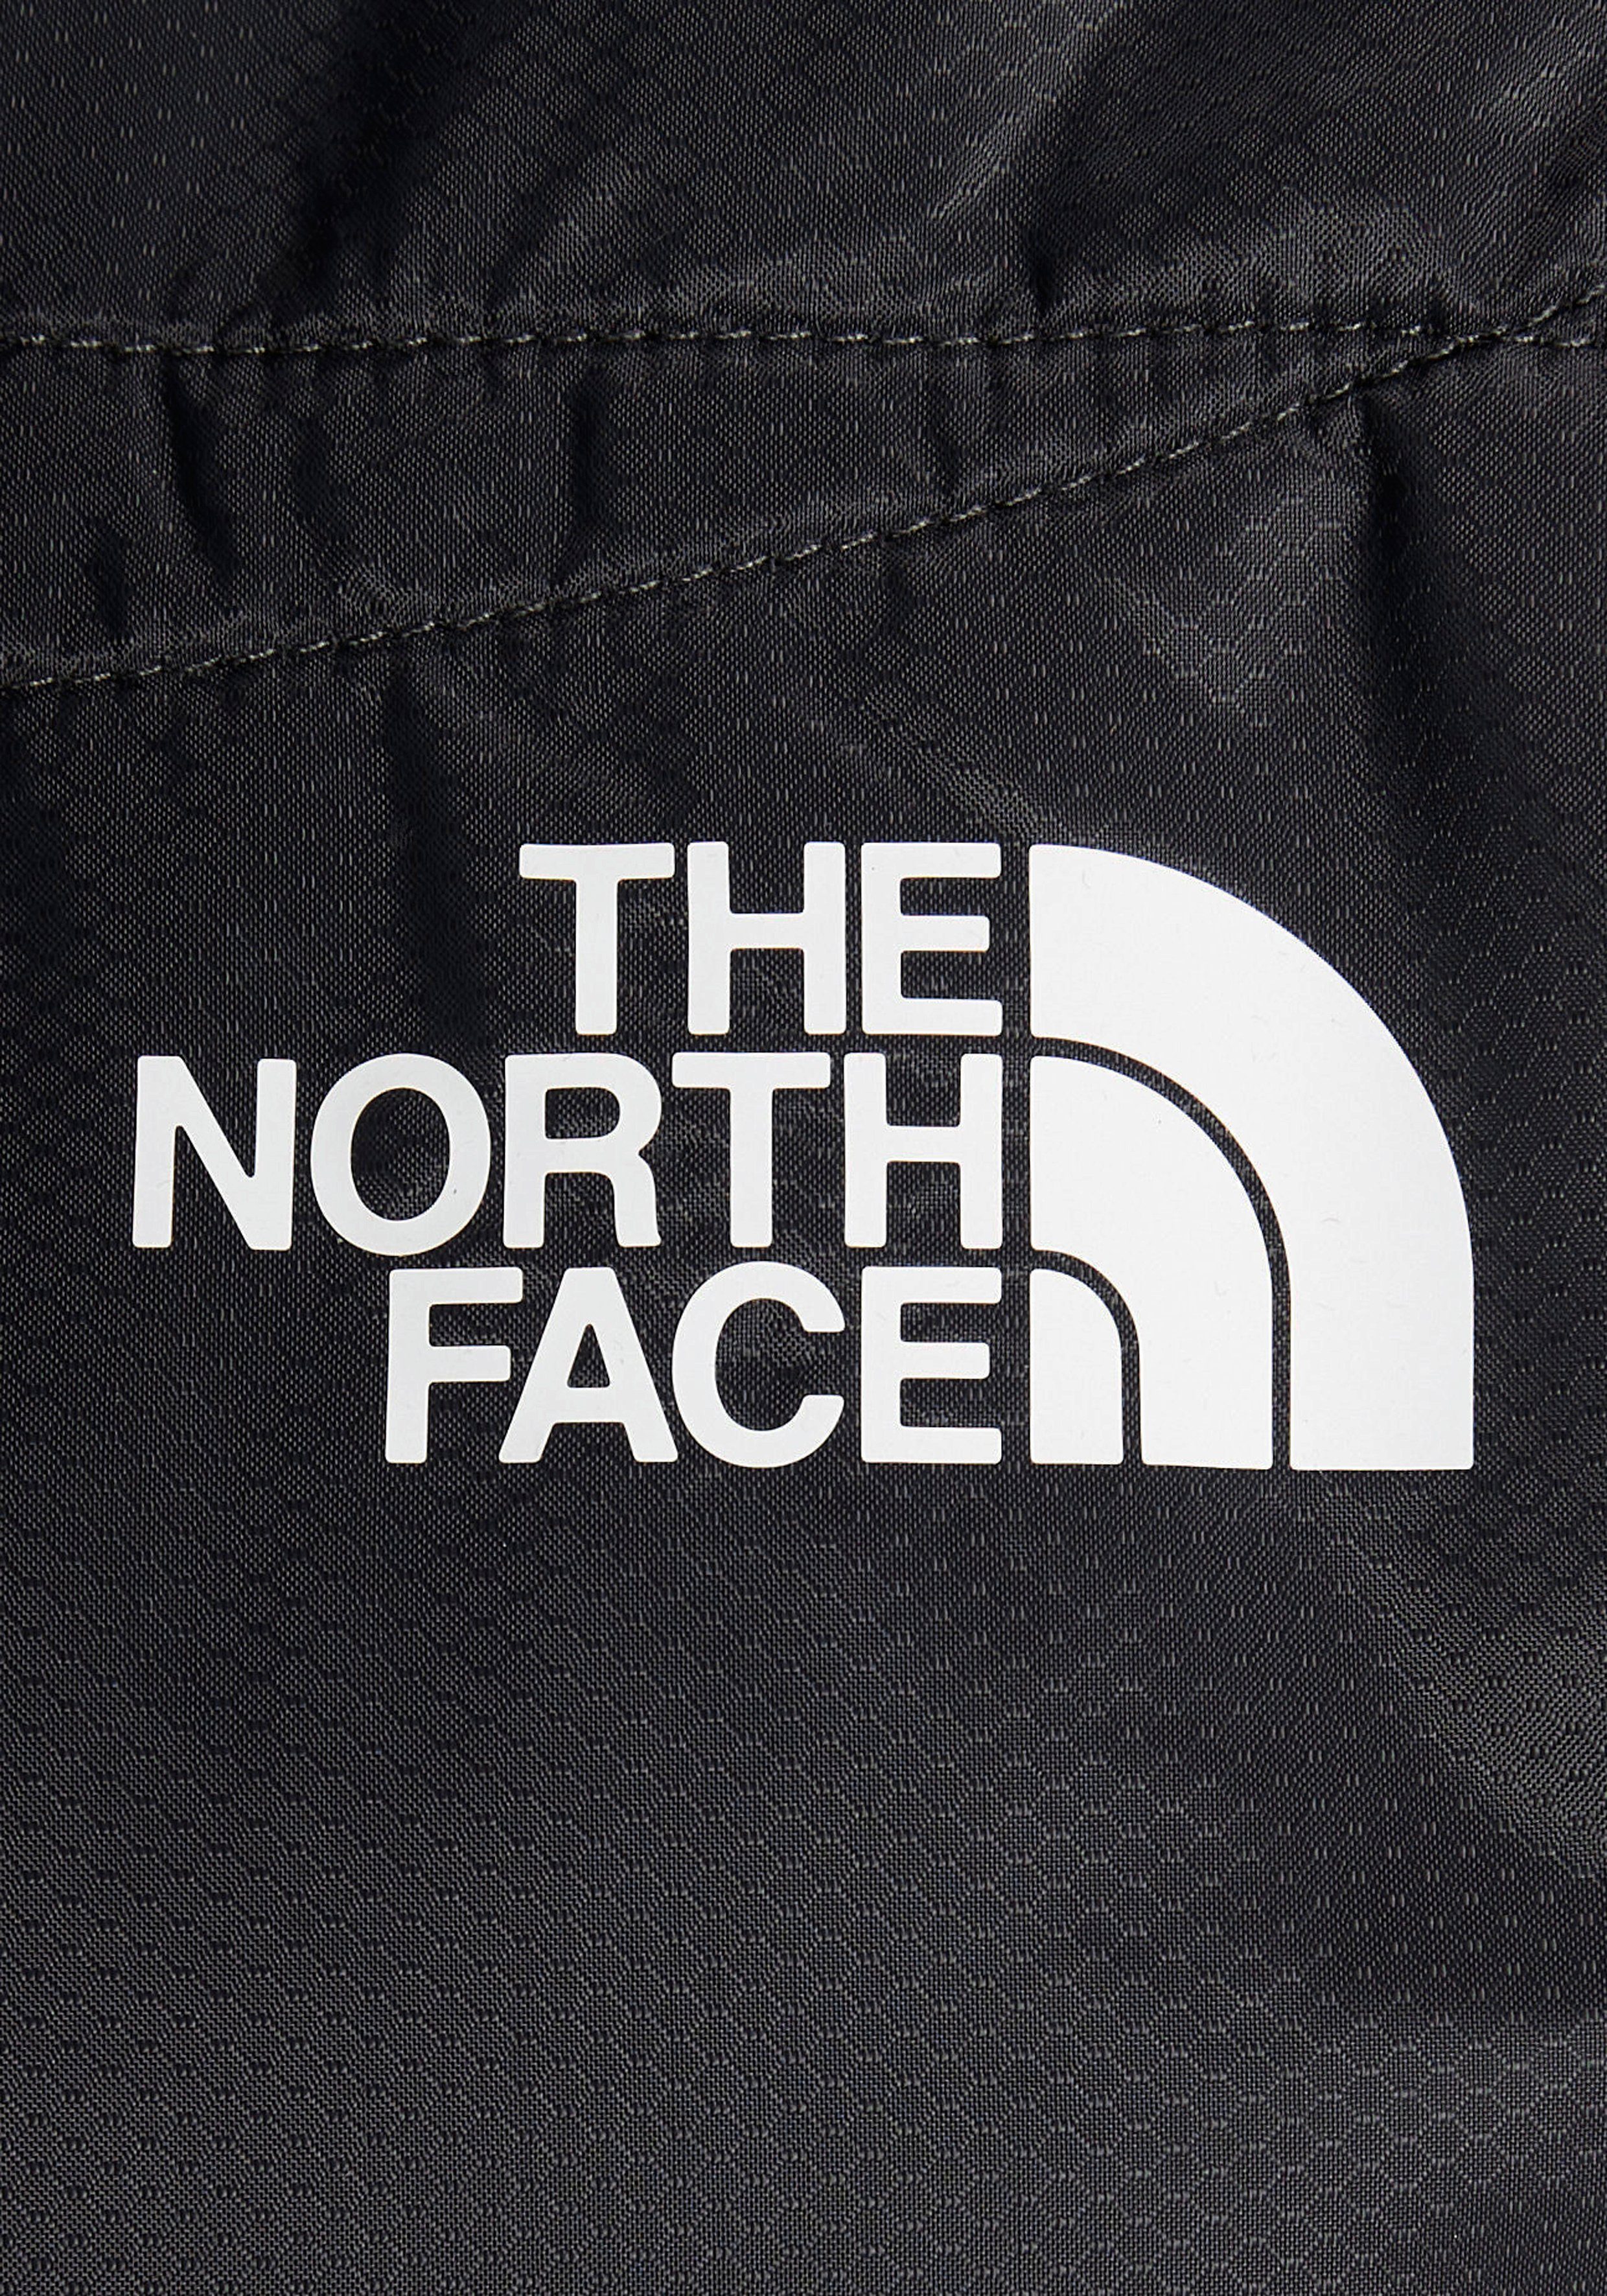 JACKET Funktionsjacke Logodruck Face North SYNTHETIC mit The M QUEST